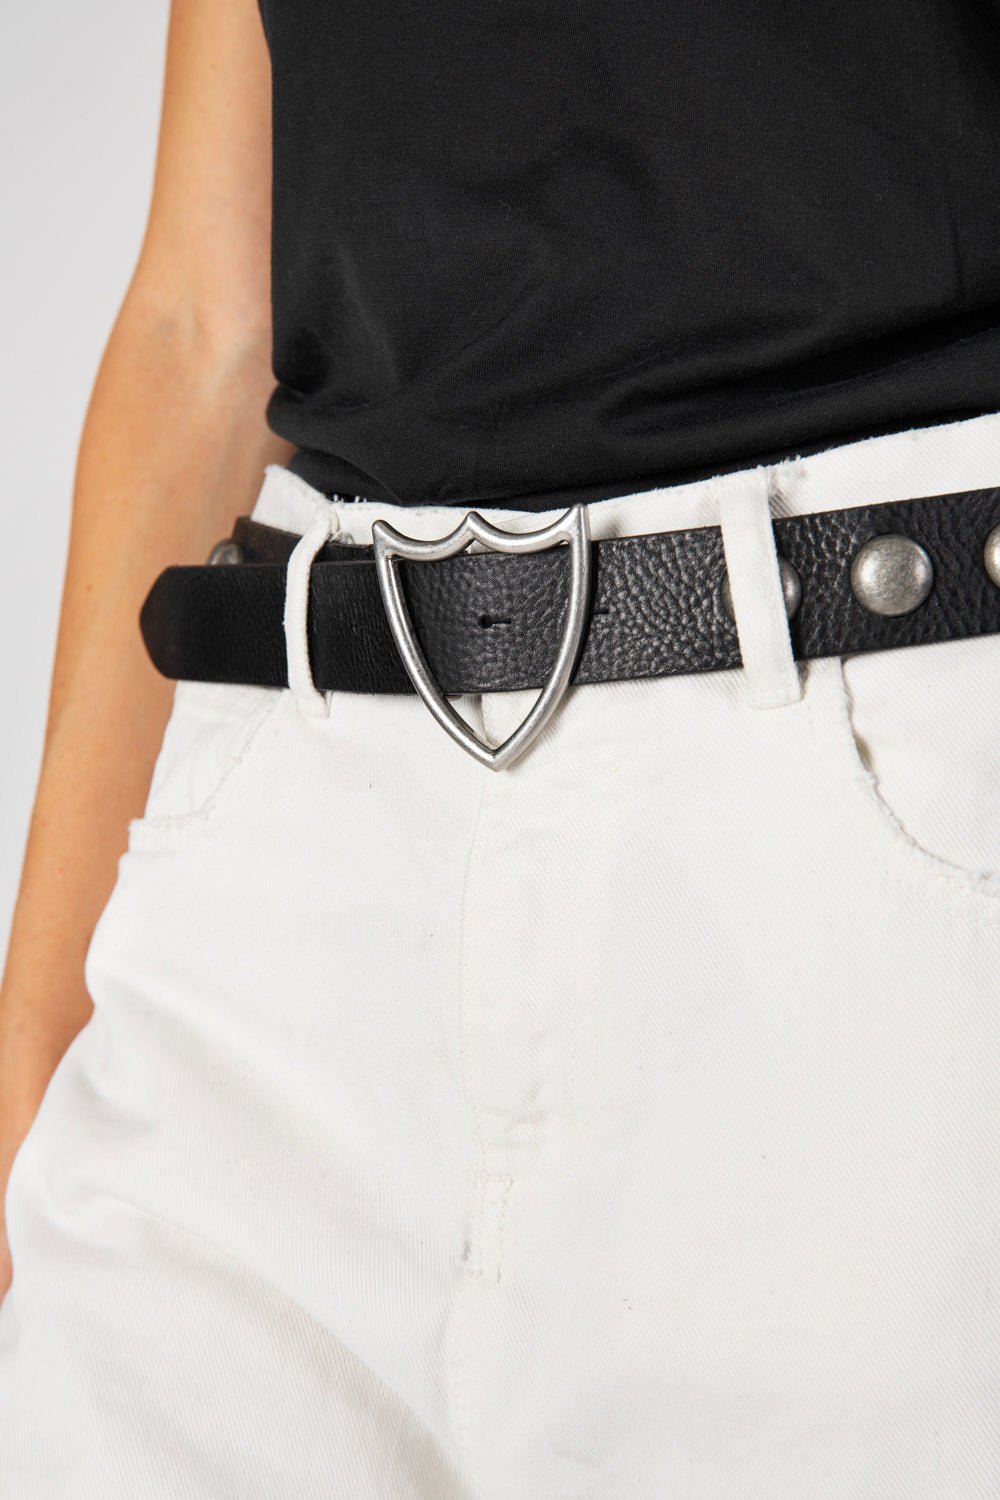 SHIELD STUDDED BELT Black leather belt with studs. Shield shaped buckle. 3,5 cm height. HTC LOS ANGELES